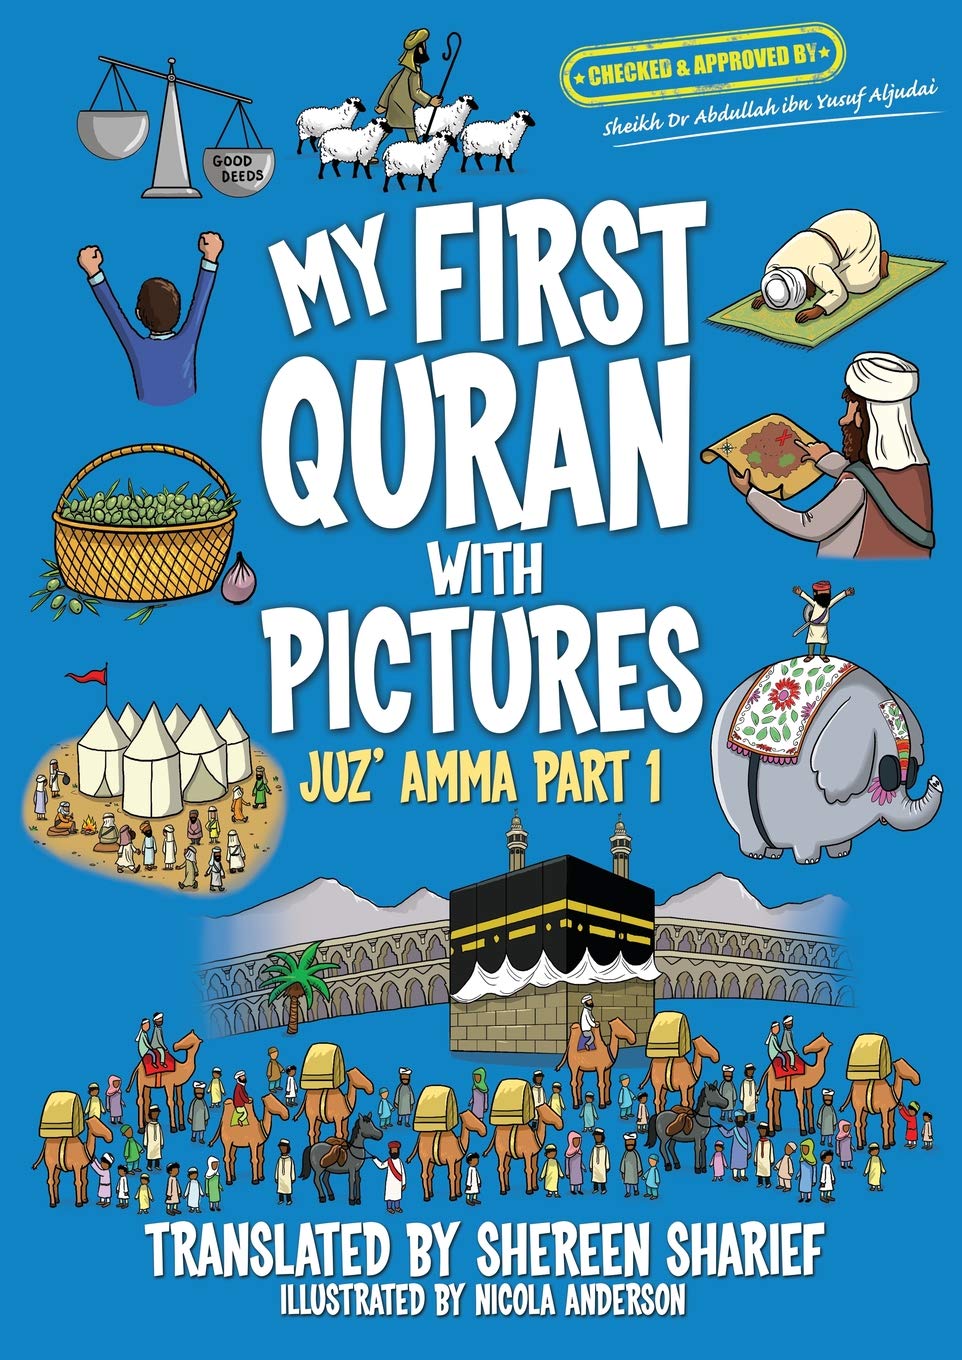 My First Quran with Pictures - Juz' Amma Part 1